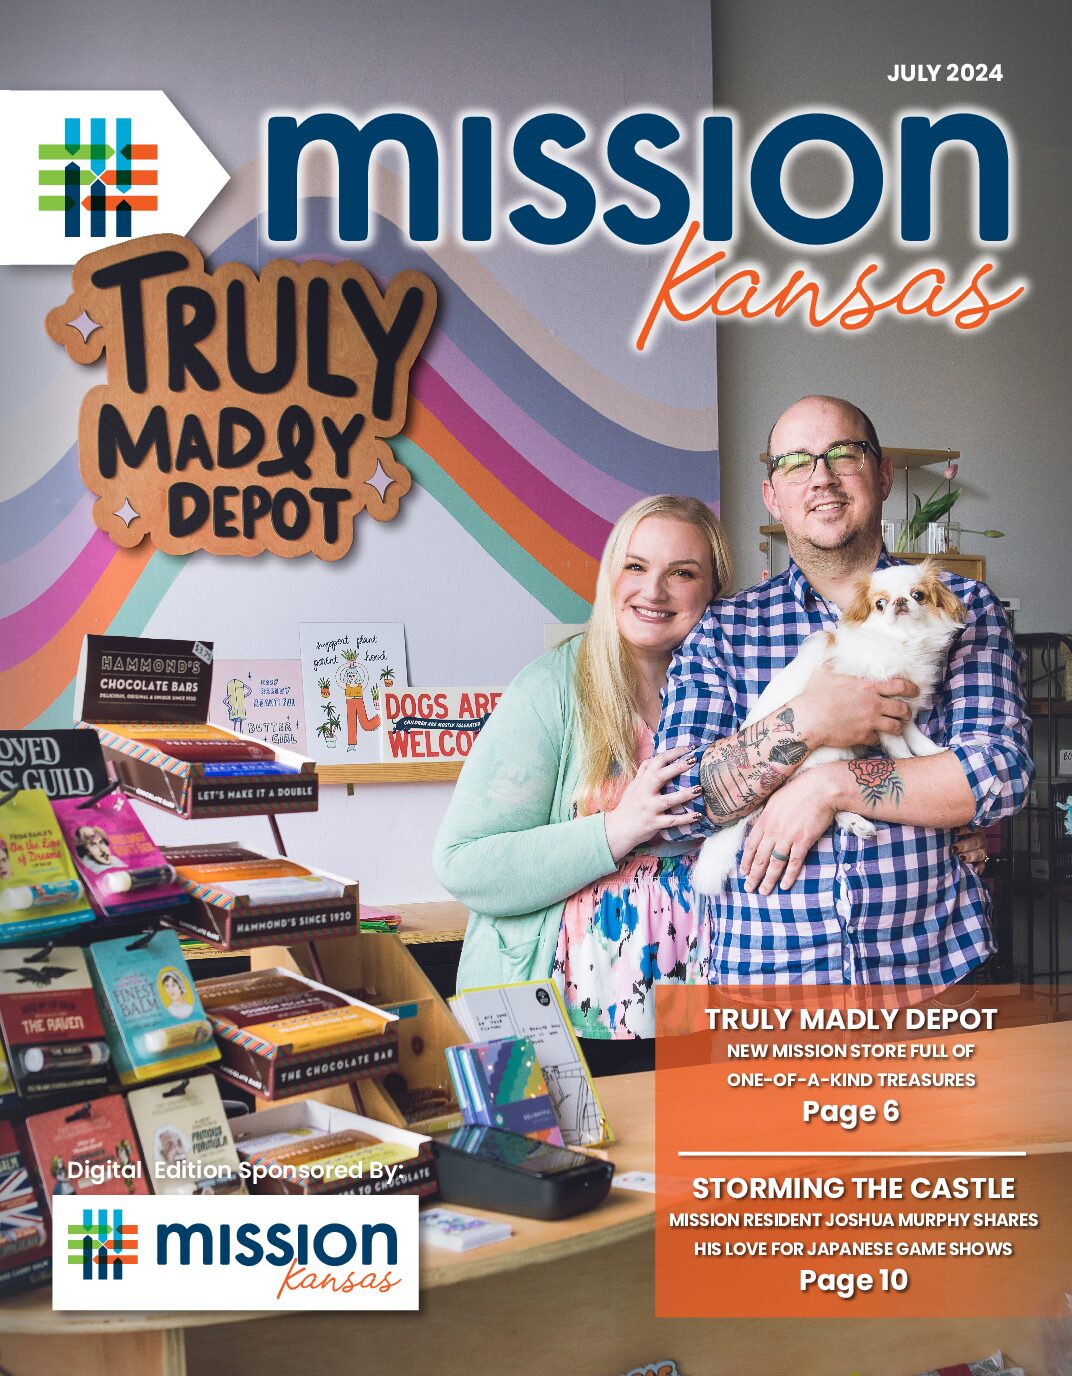 Read the Latest Edition of the Mission Magazine